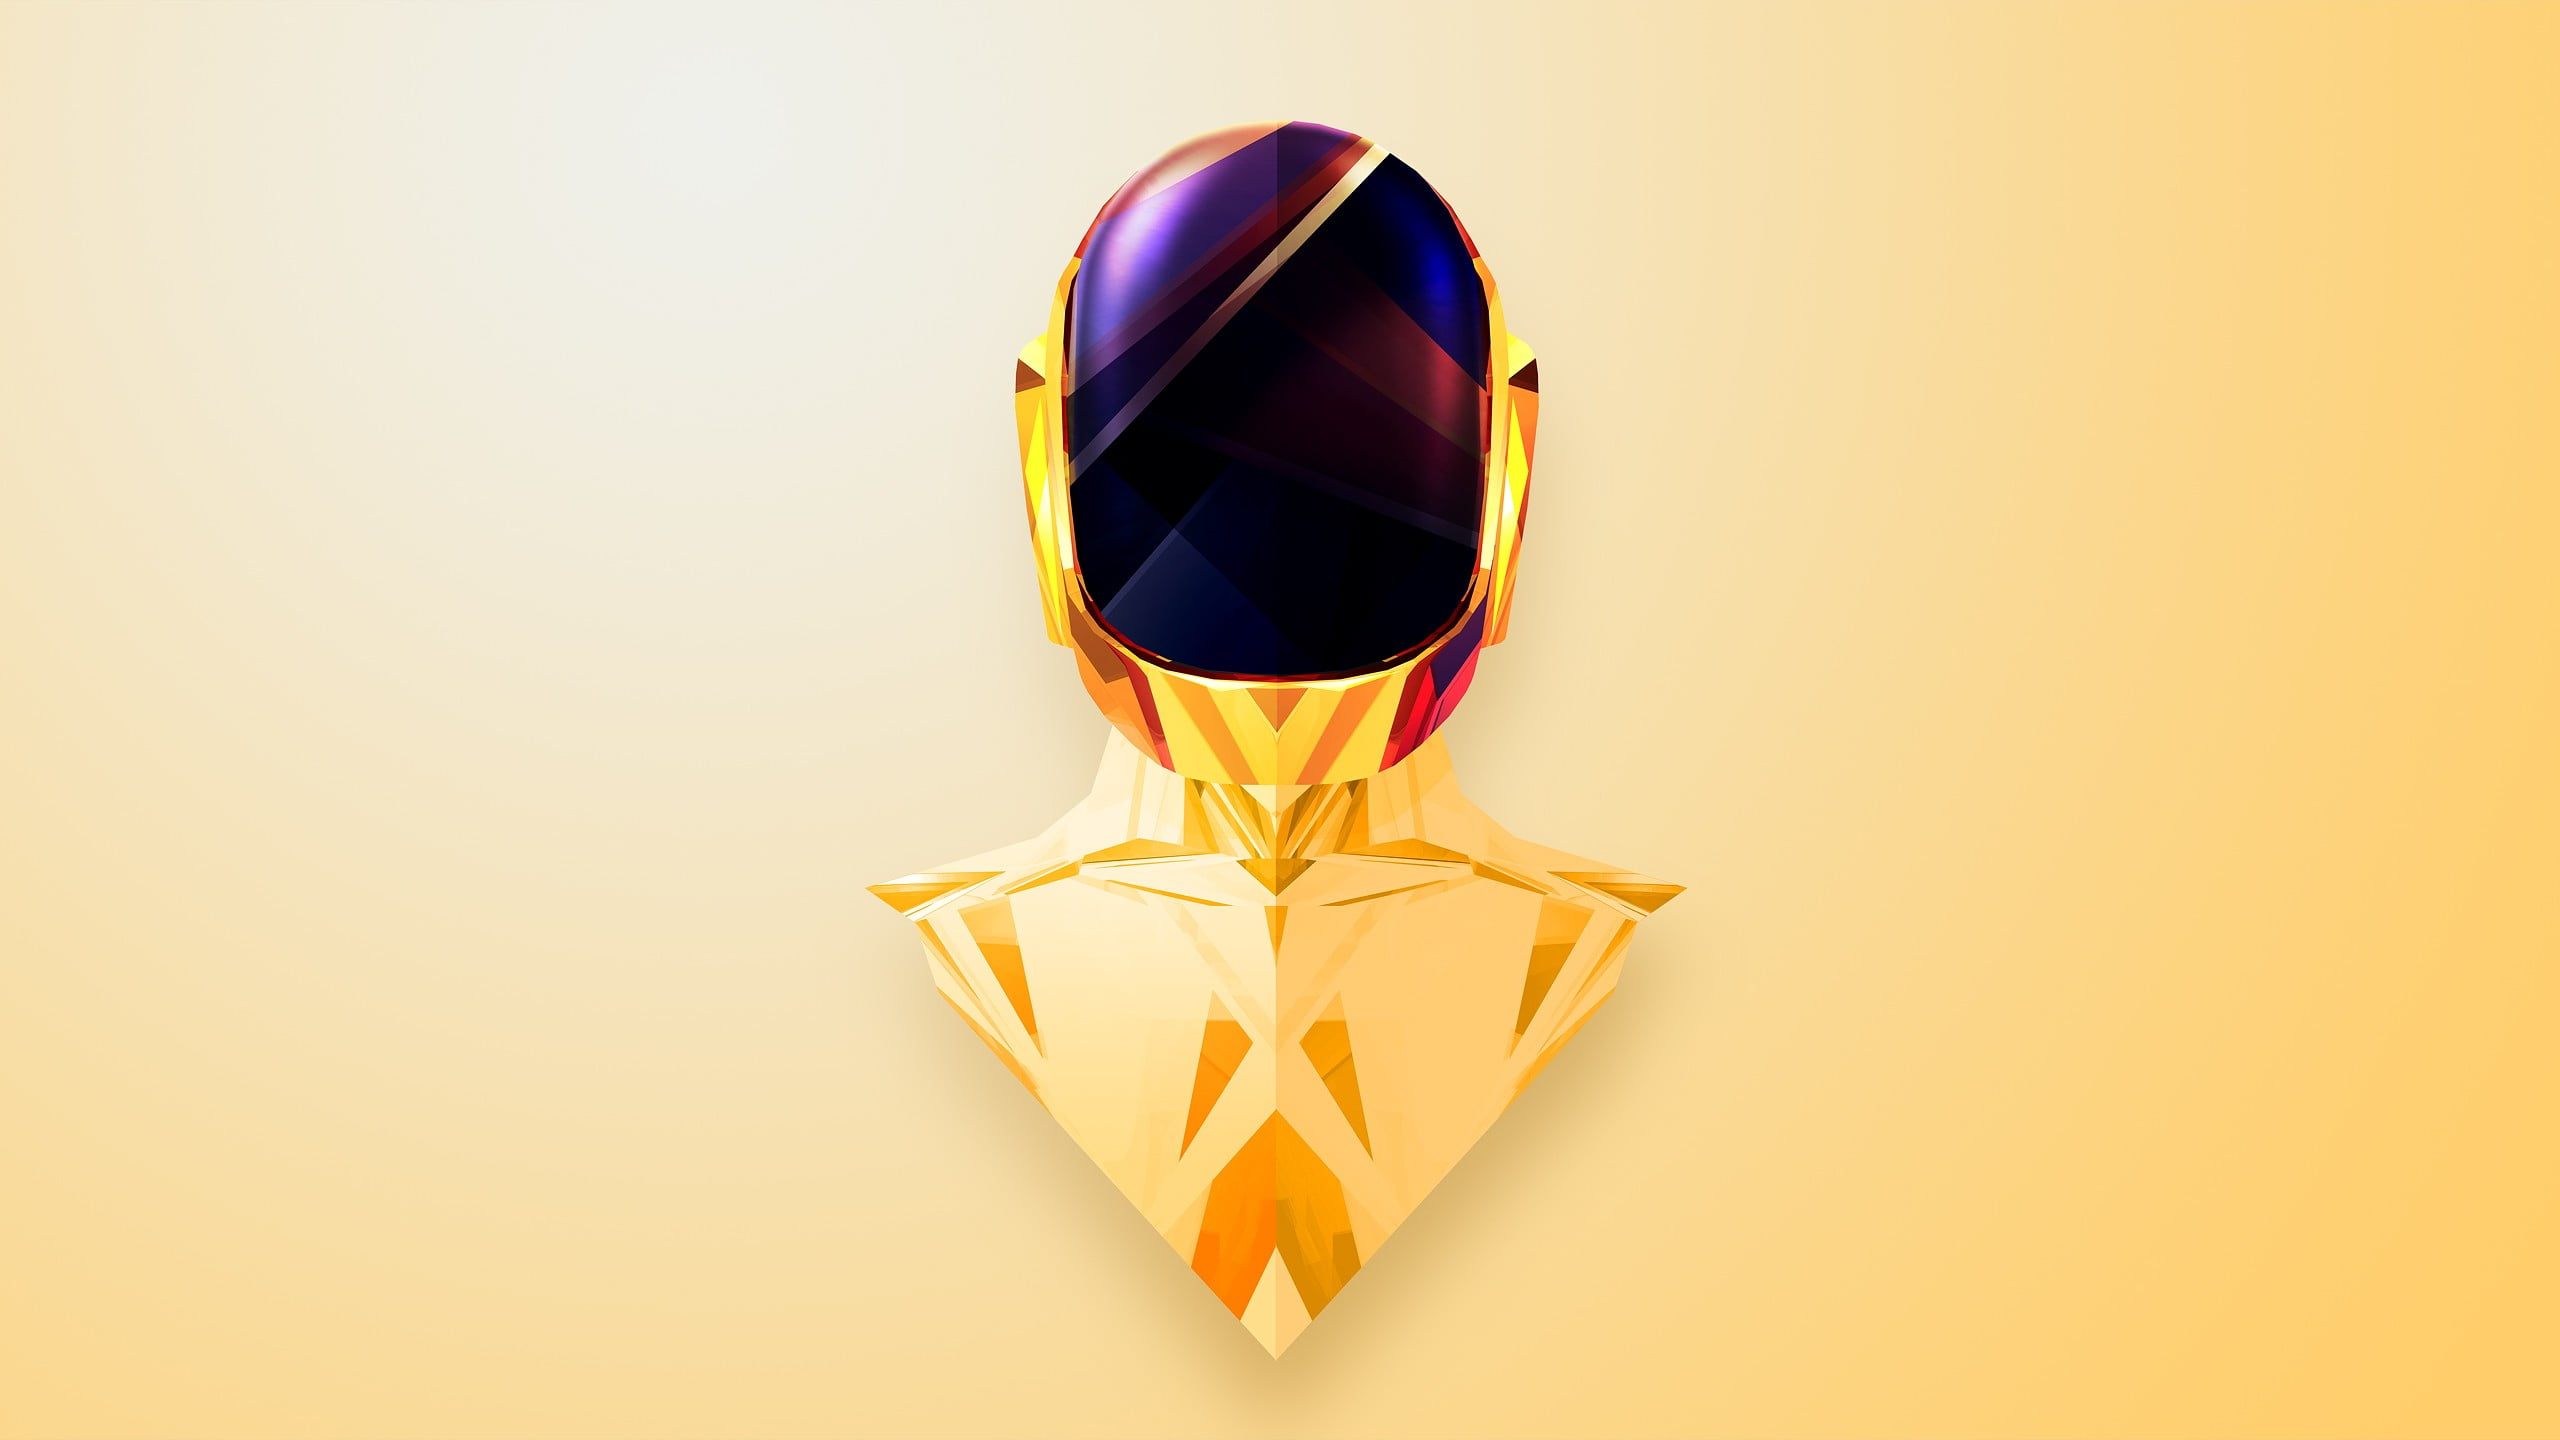 2560x1440 Gold-colored accessory with purple gemstone, abstract, Justin Maller, Daft Punk HD wallpaper